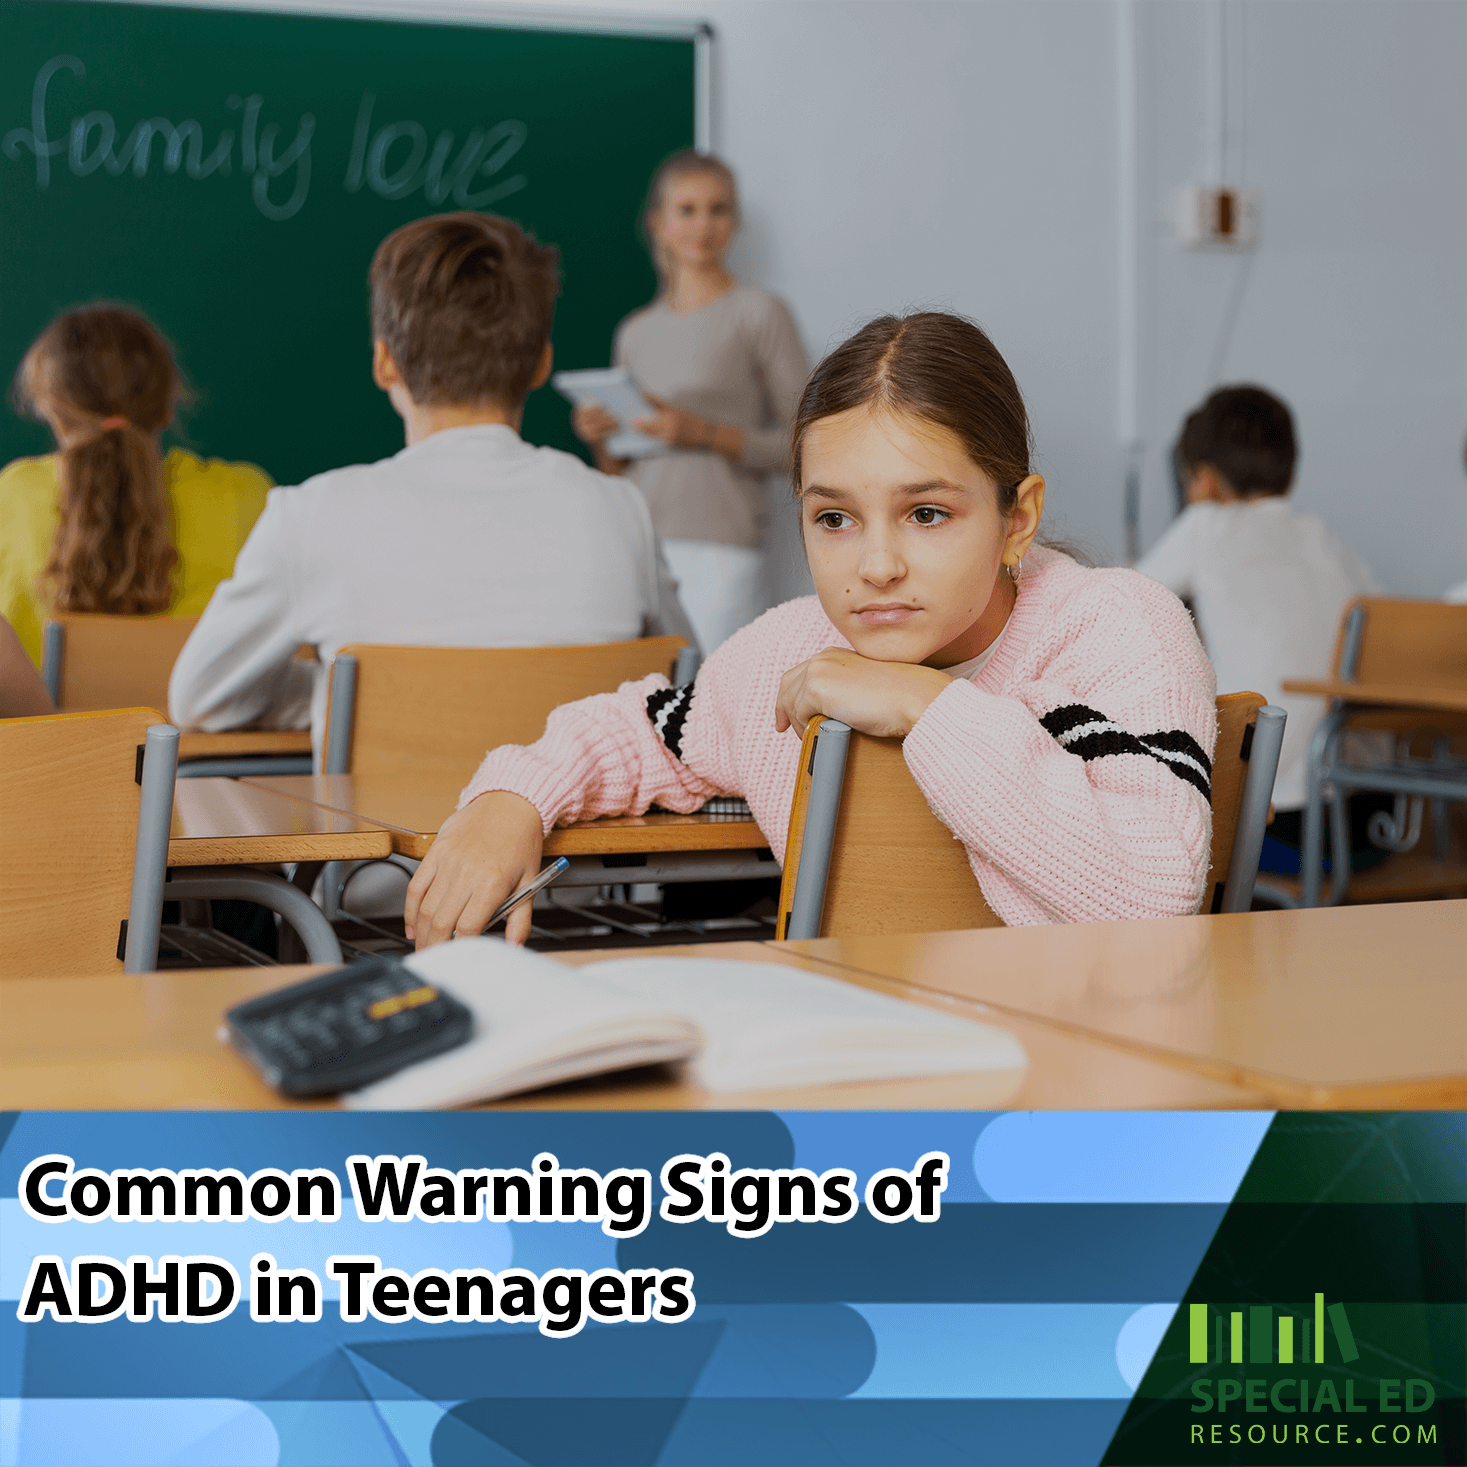 Teenage girl in a classroom looking distracted, symbolizing the signs of ADHD in teenagers, highlighting the challenges faced in academic settings.